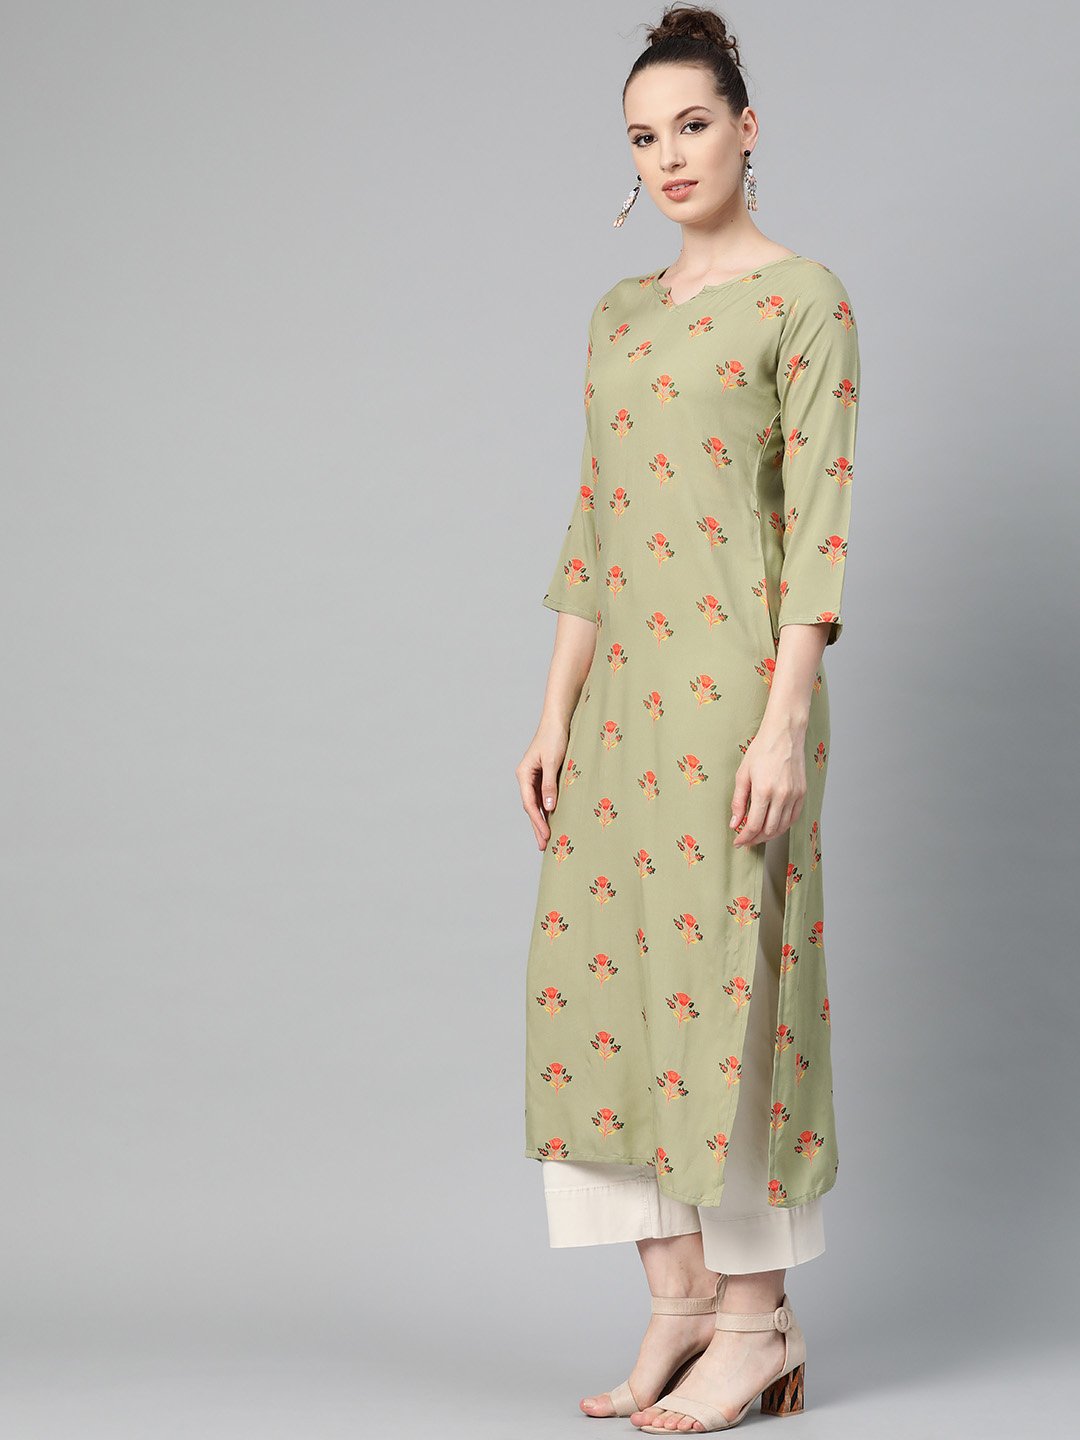 Women's Olive Green Multi Colored Printed Kurta With Round Neck With V & 3/4 Sleeves - Nayo Clothing